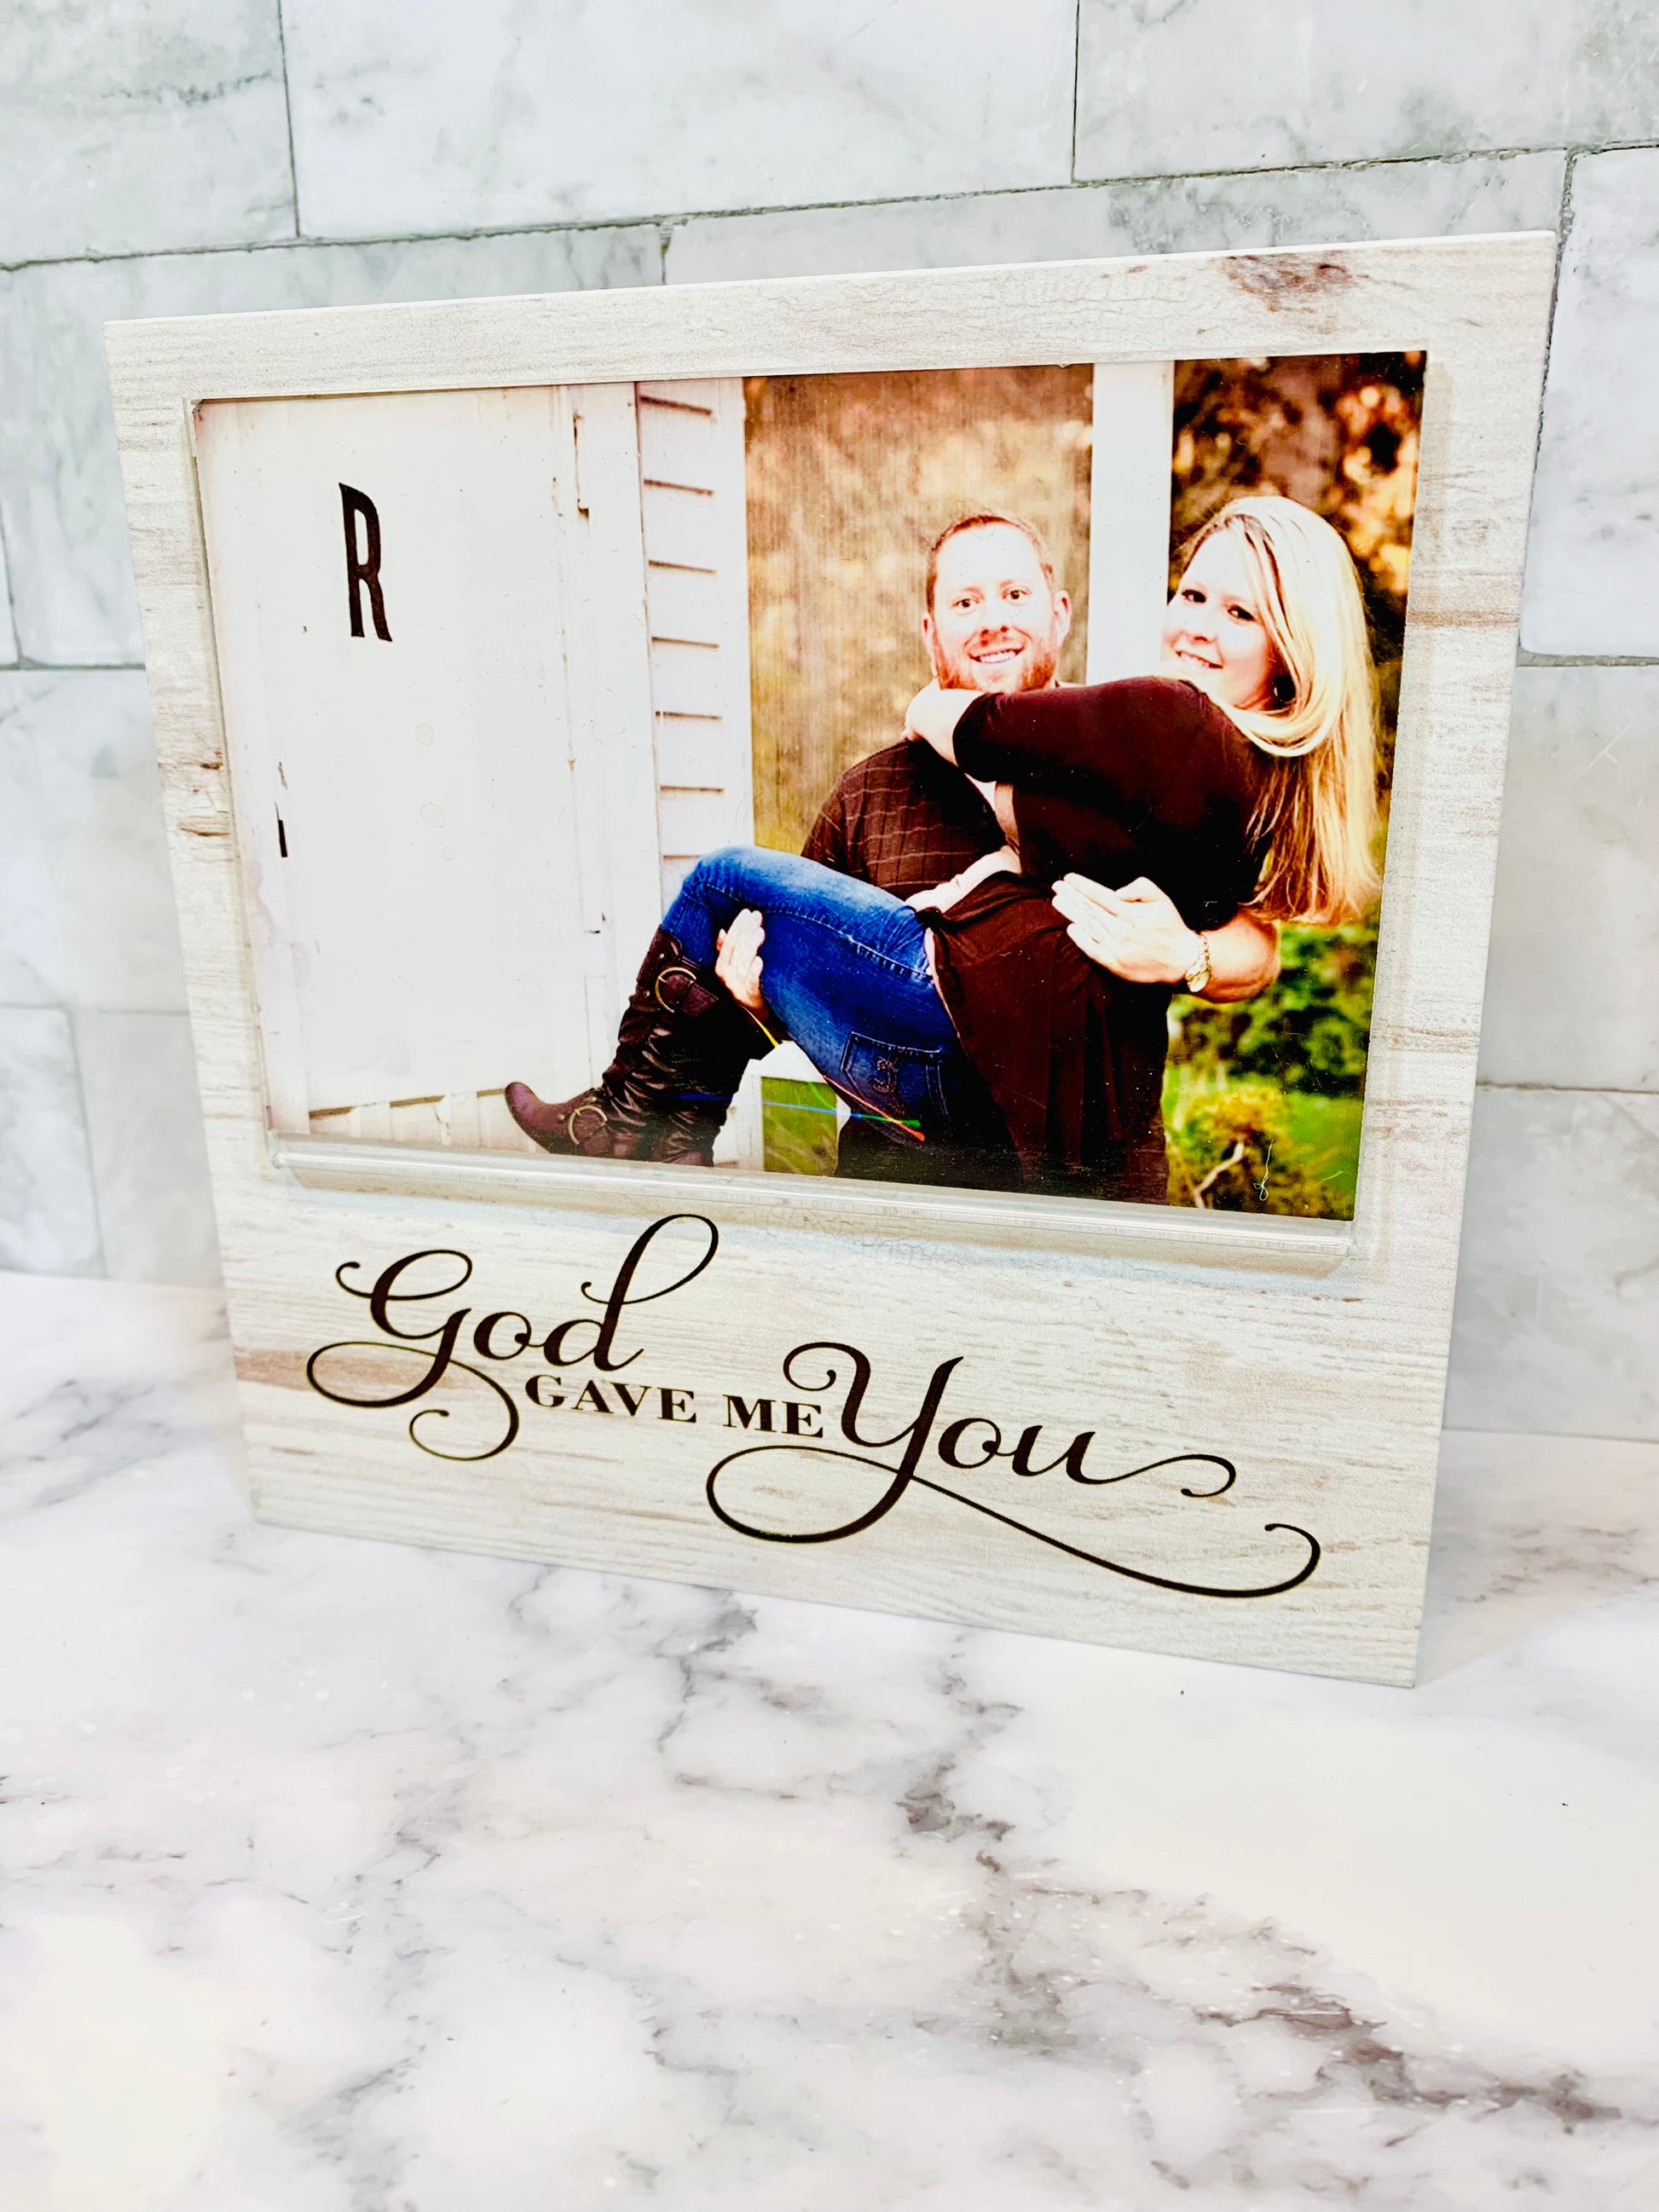 Romantic Personalized Picture Frames - Because of You - 4x6